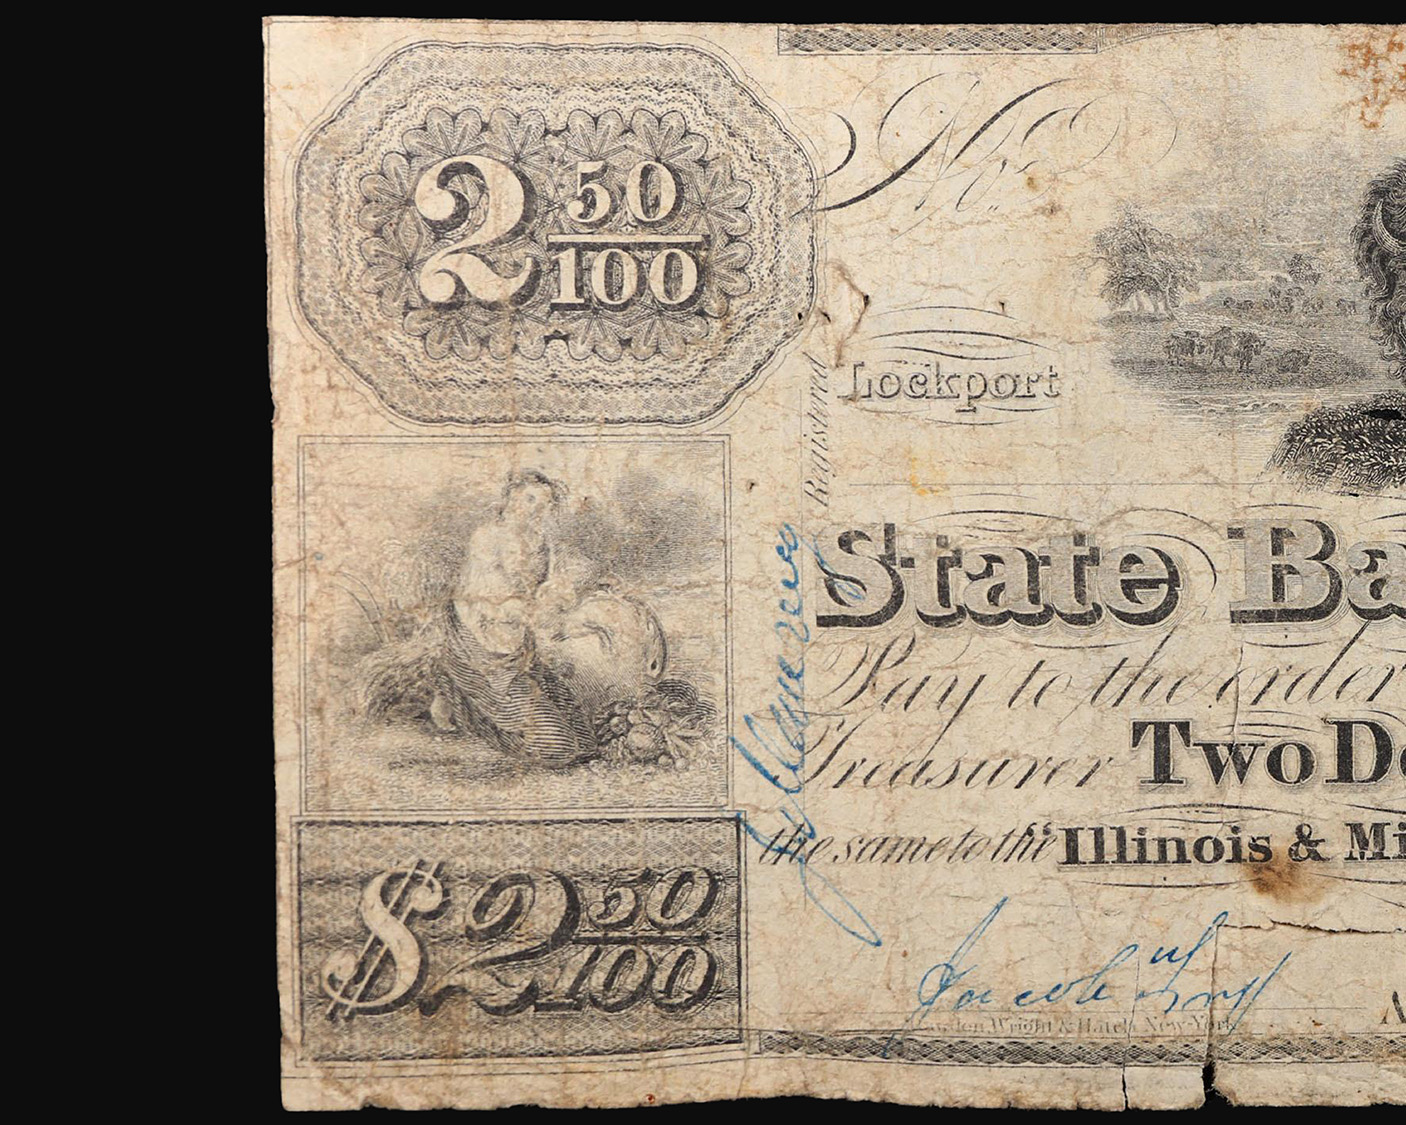 Long Table 154. Scrip Issued for the Illinois and Michigan Canal